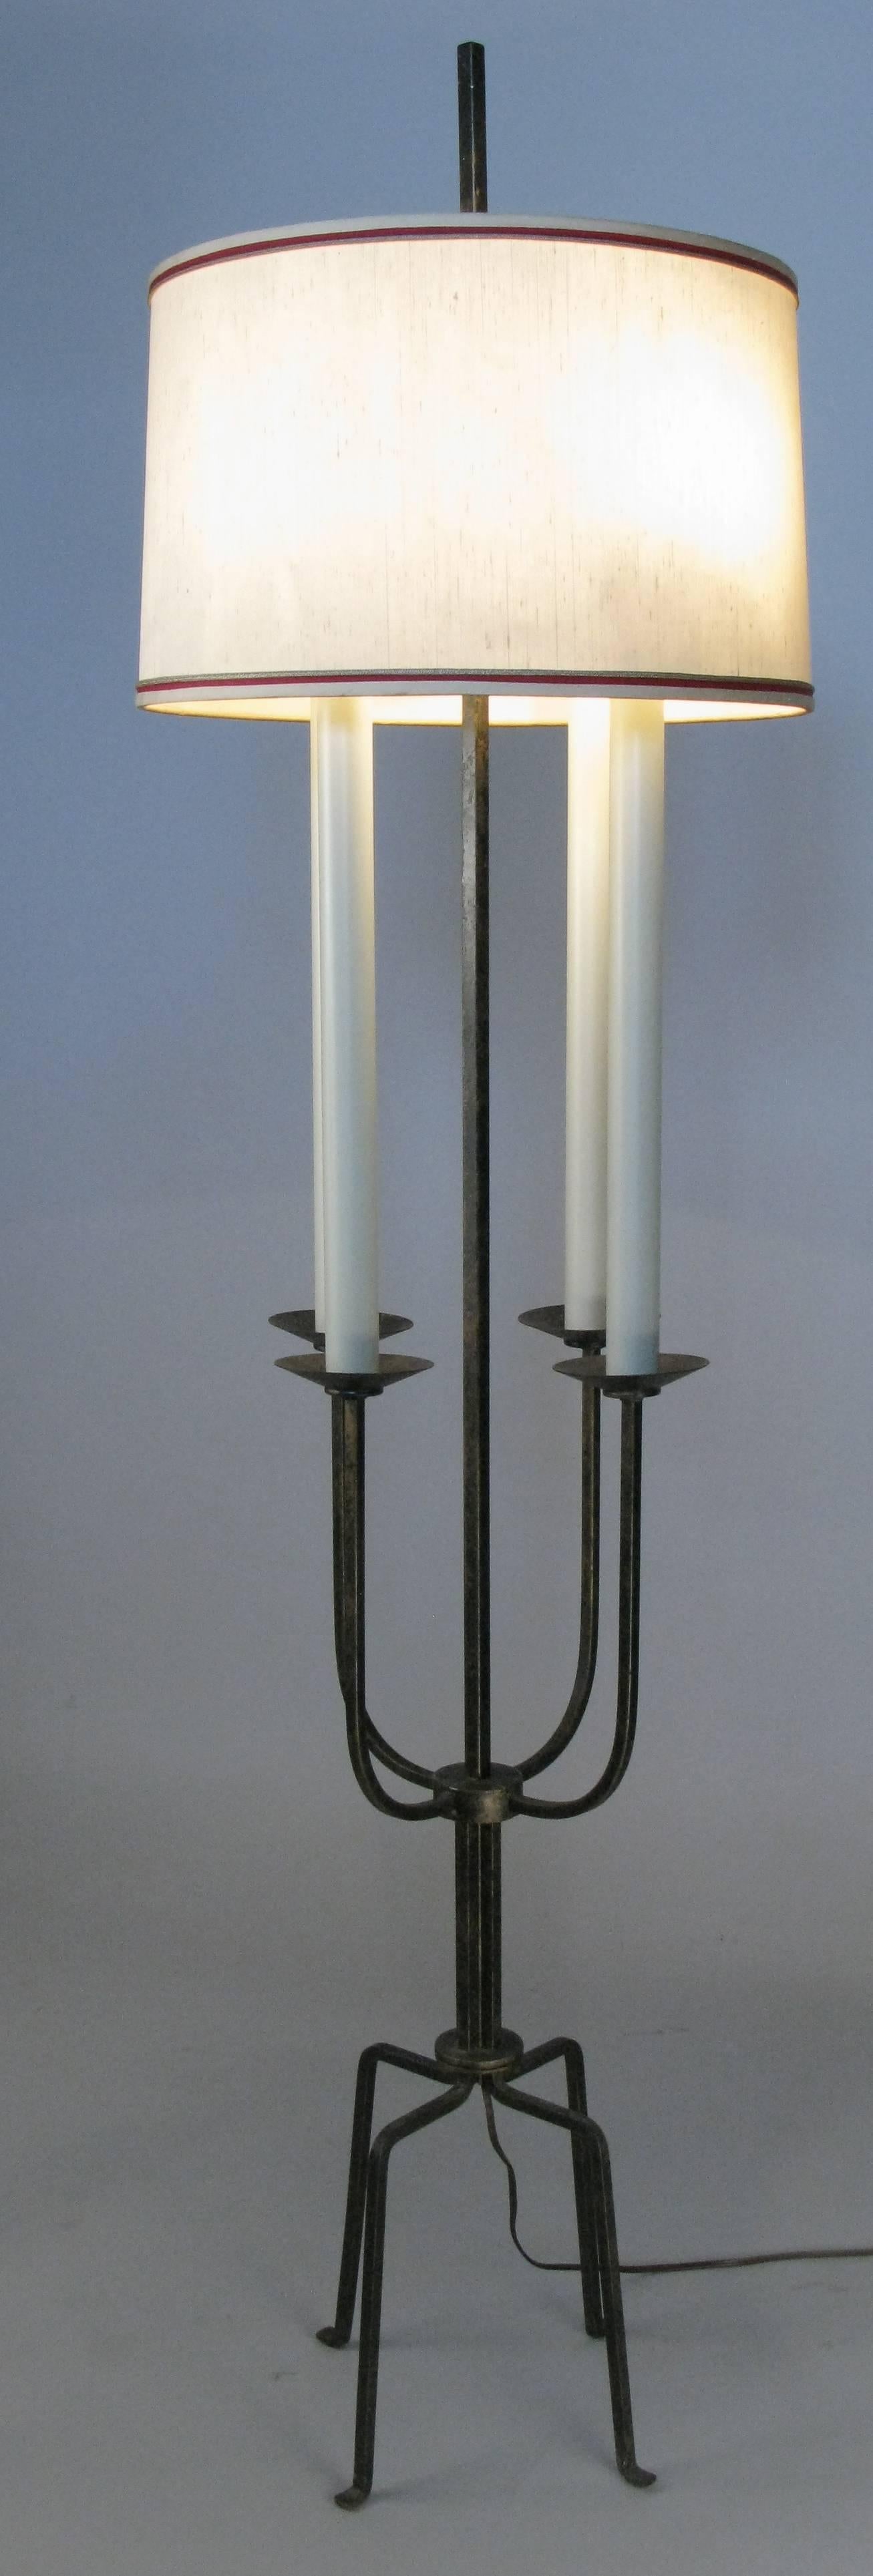 A classic modern 1940s wrought iron floor lamp by Tommi Parzinger for Parzinger originals. Beautiful design with four 'candle' lights and the original shade. In its original black with gold wash finish.